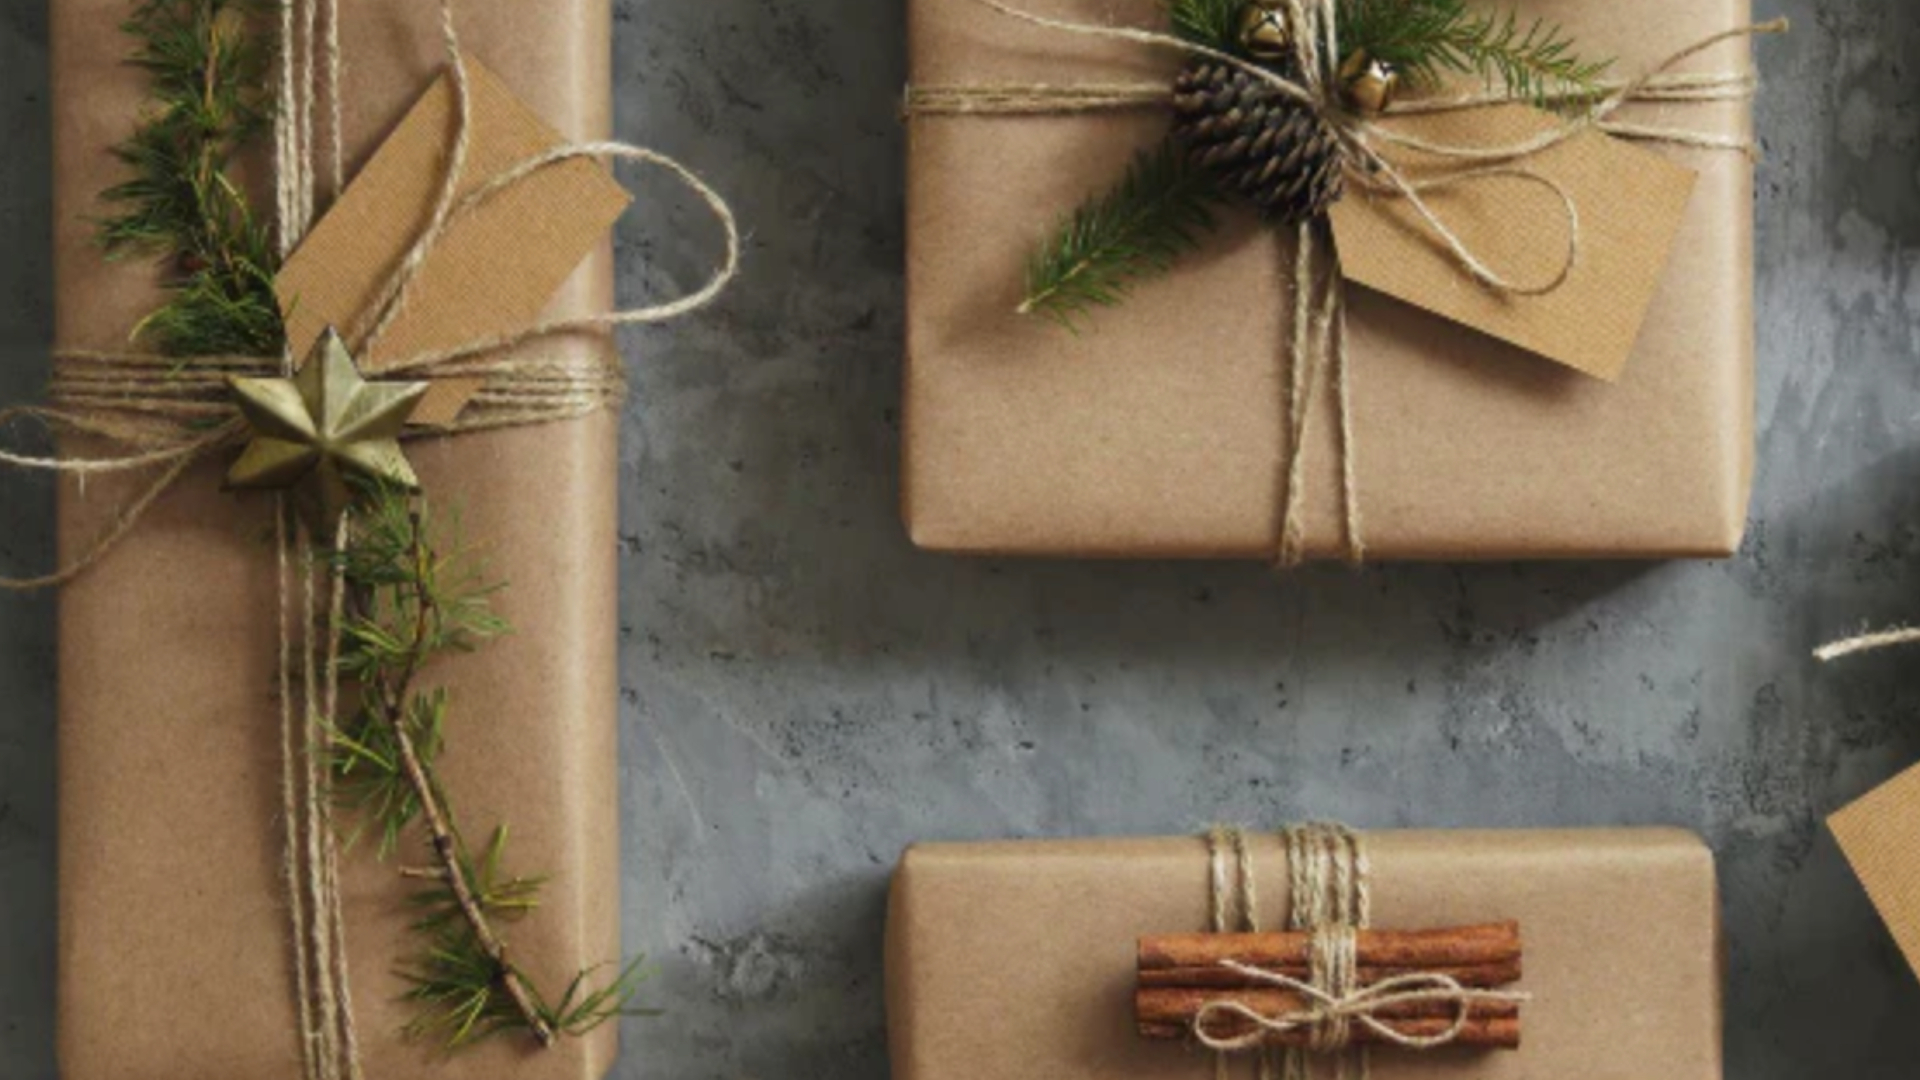 Make your holidays sustainable with this gift guide